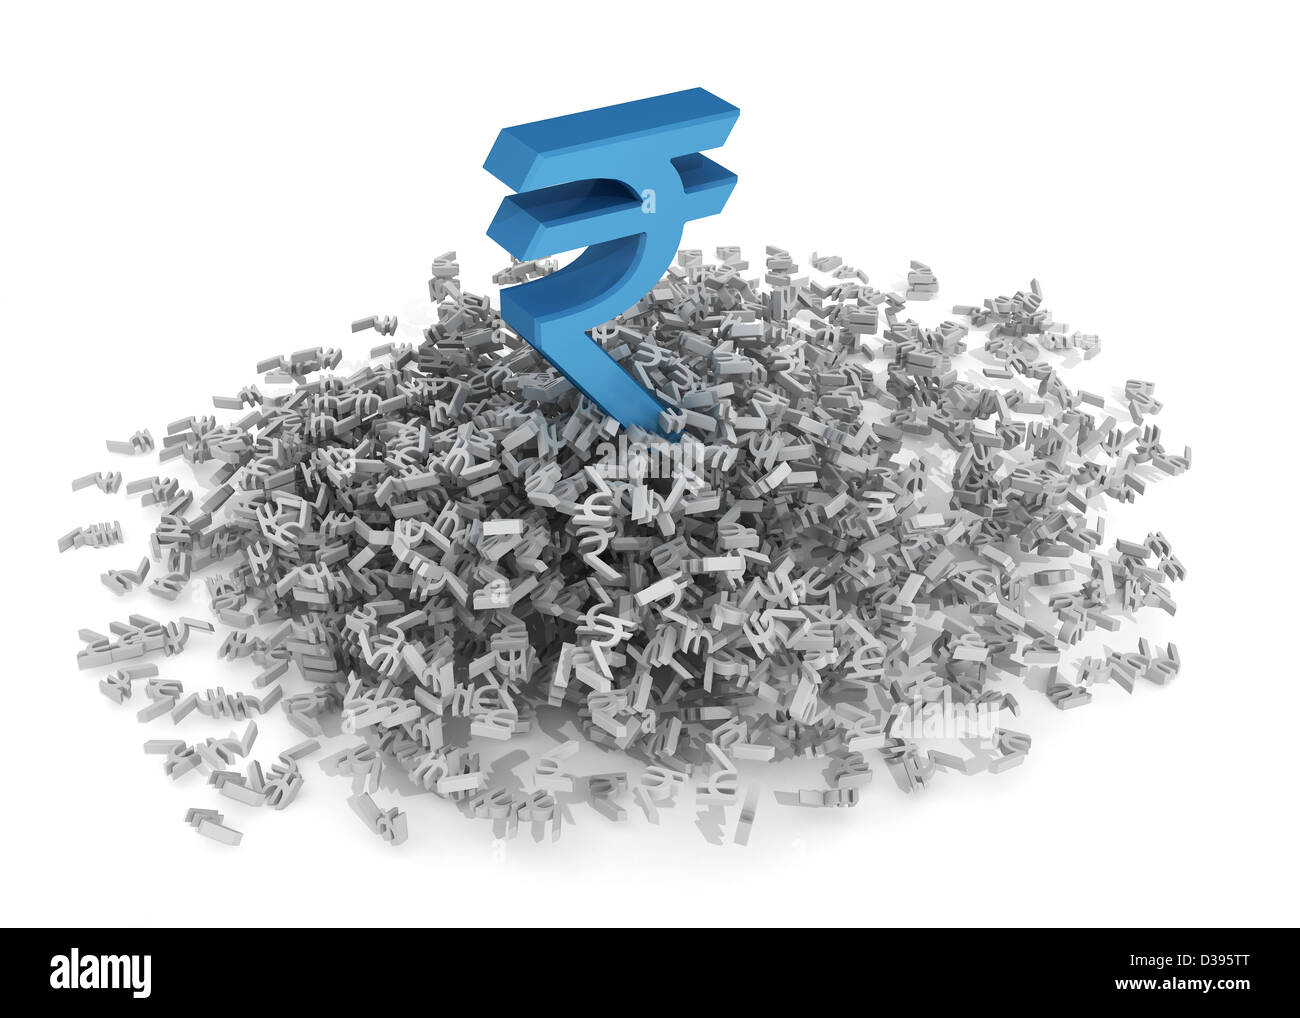 Big Rupee sign on top of small currency symbols Stock Photo